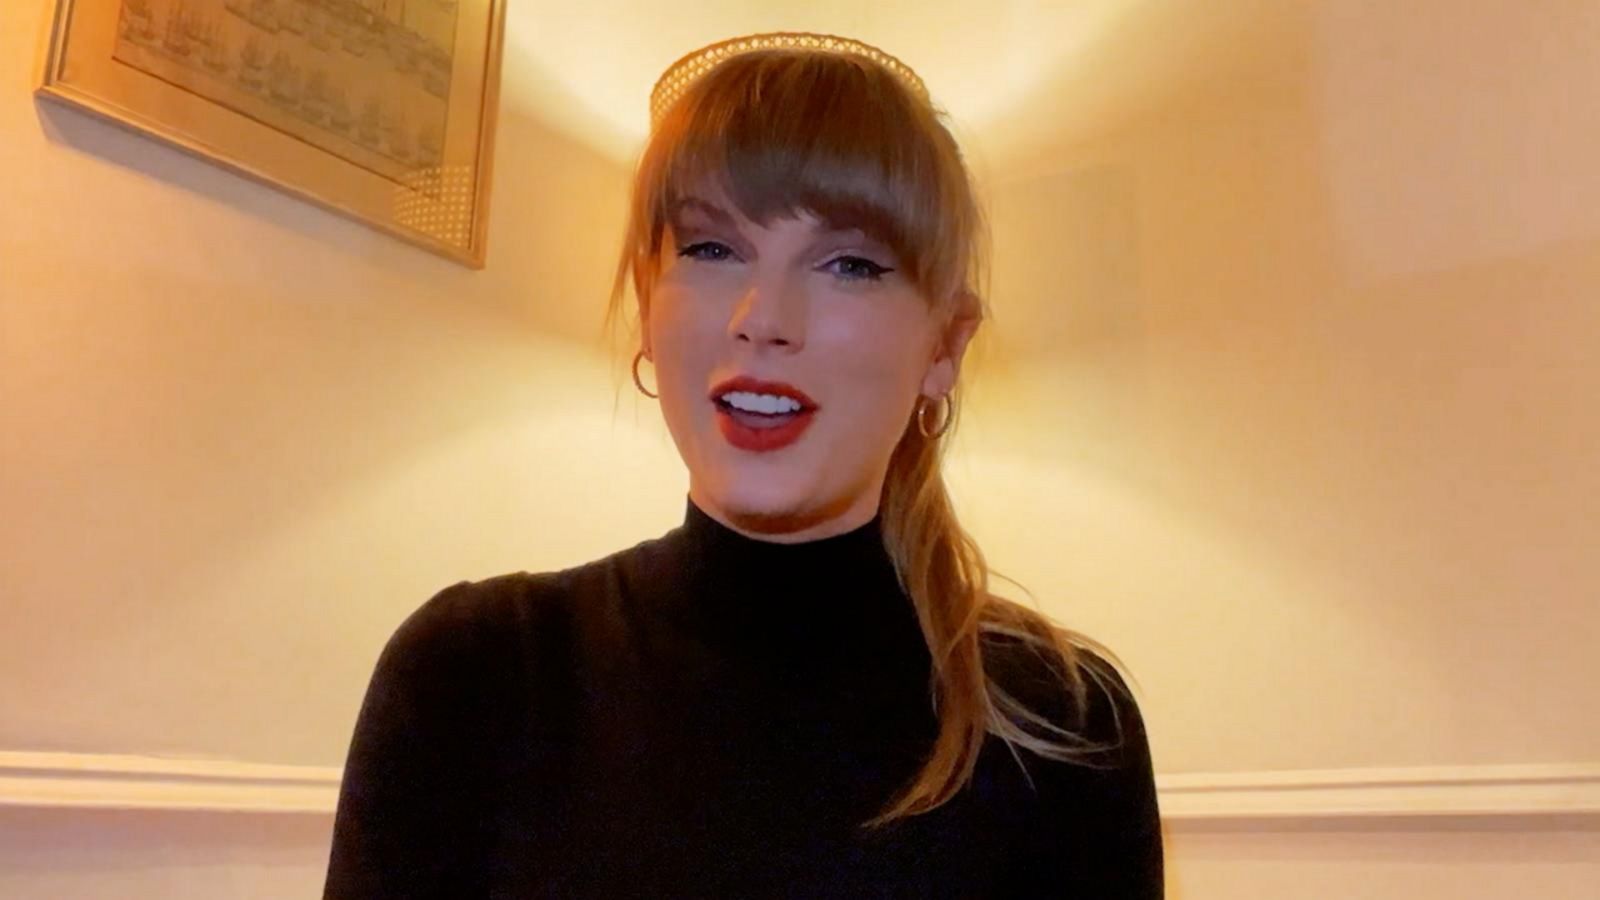 Kids News: Taylor Swift breaks record as female with most no. 1